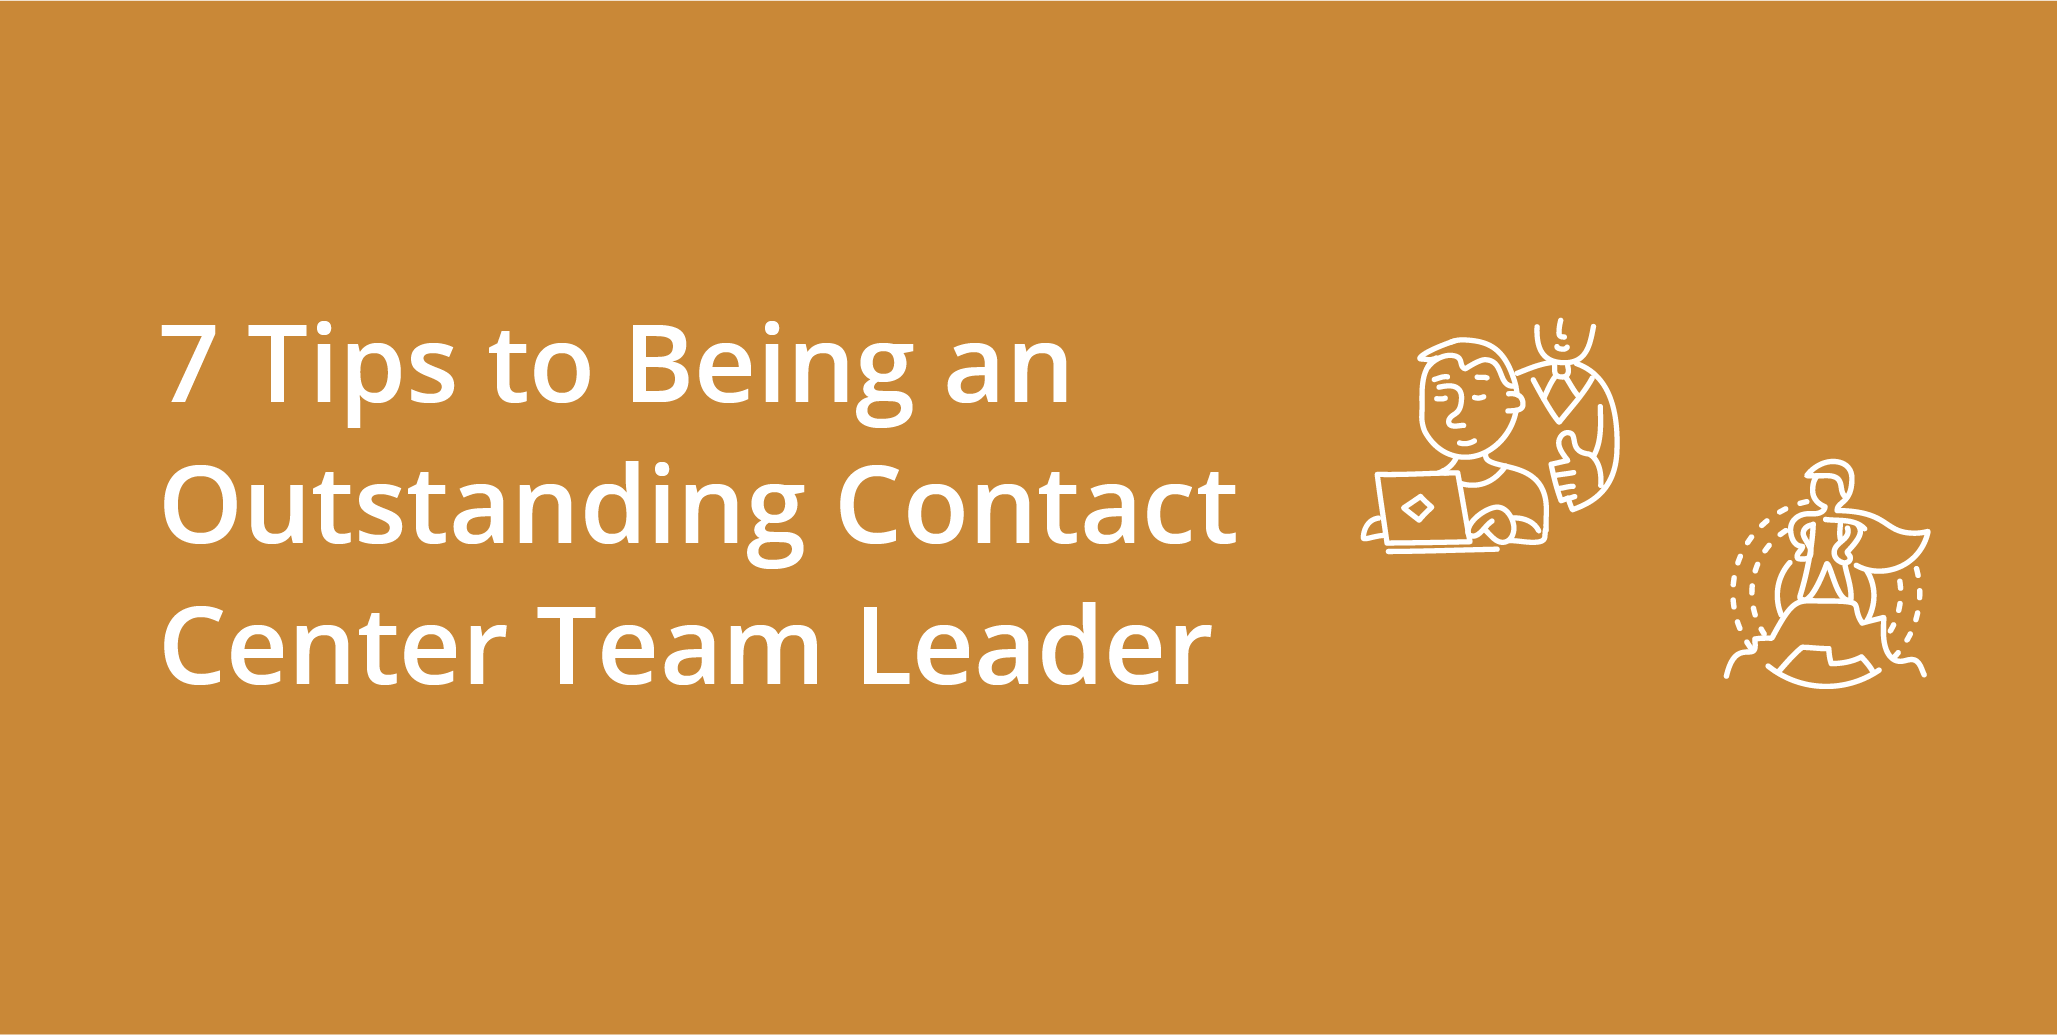 7 Tips to Being an Outstanding Contact Center Team Leader | Telephones for business